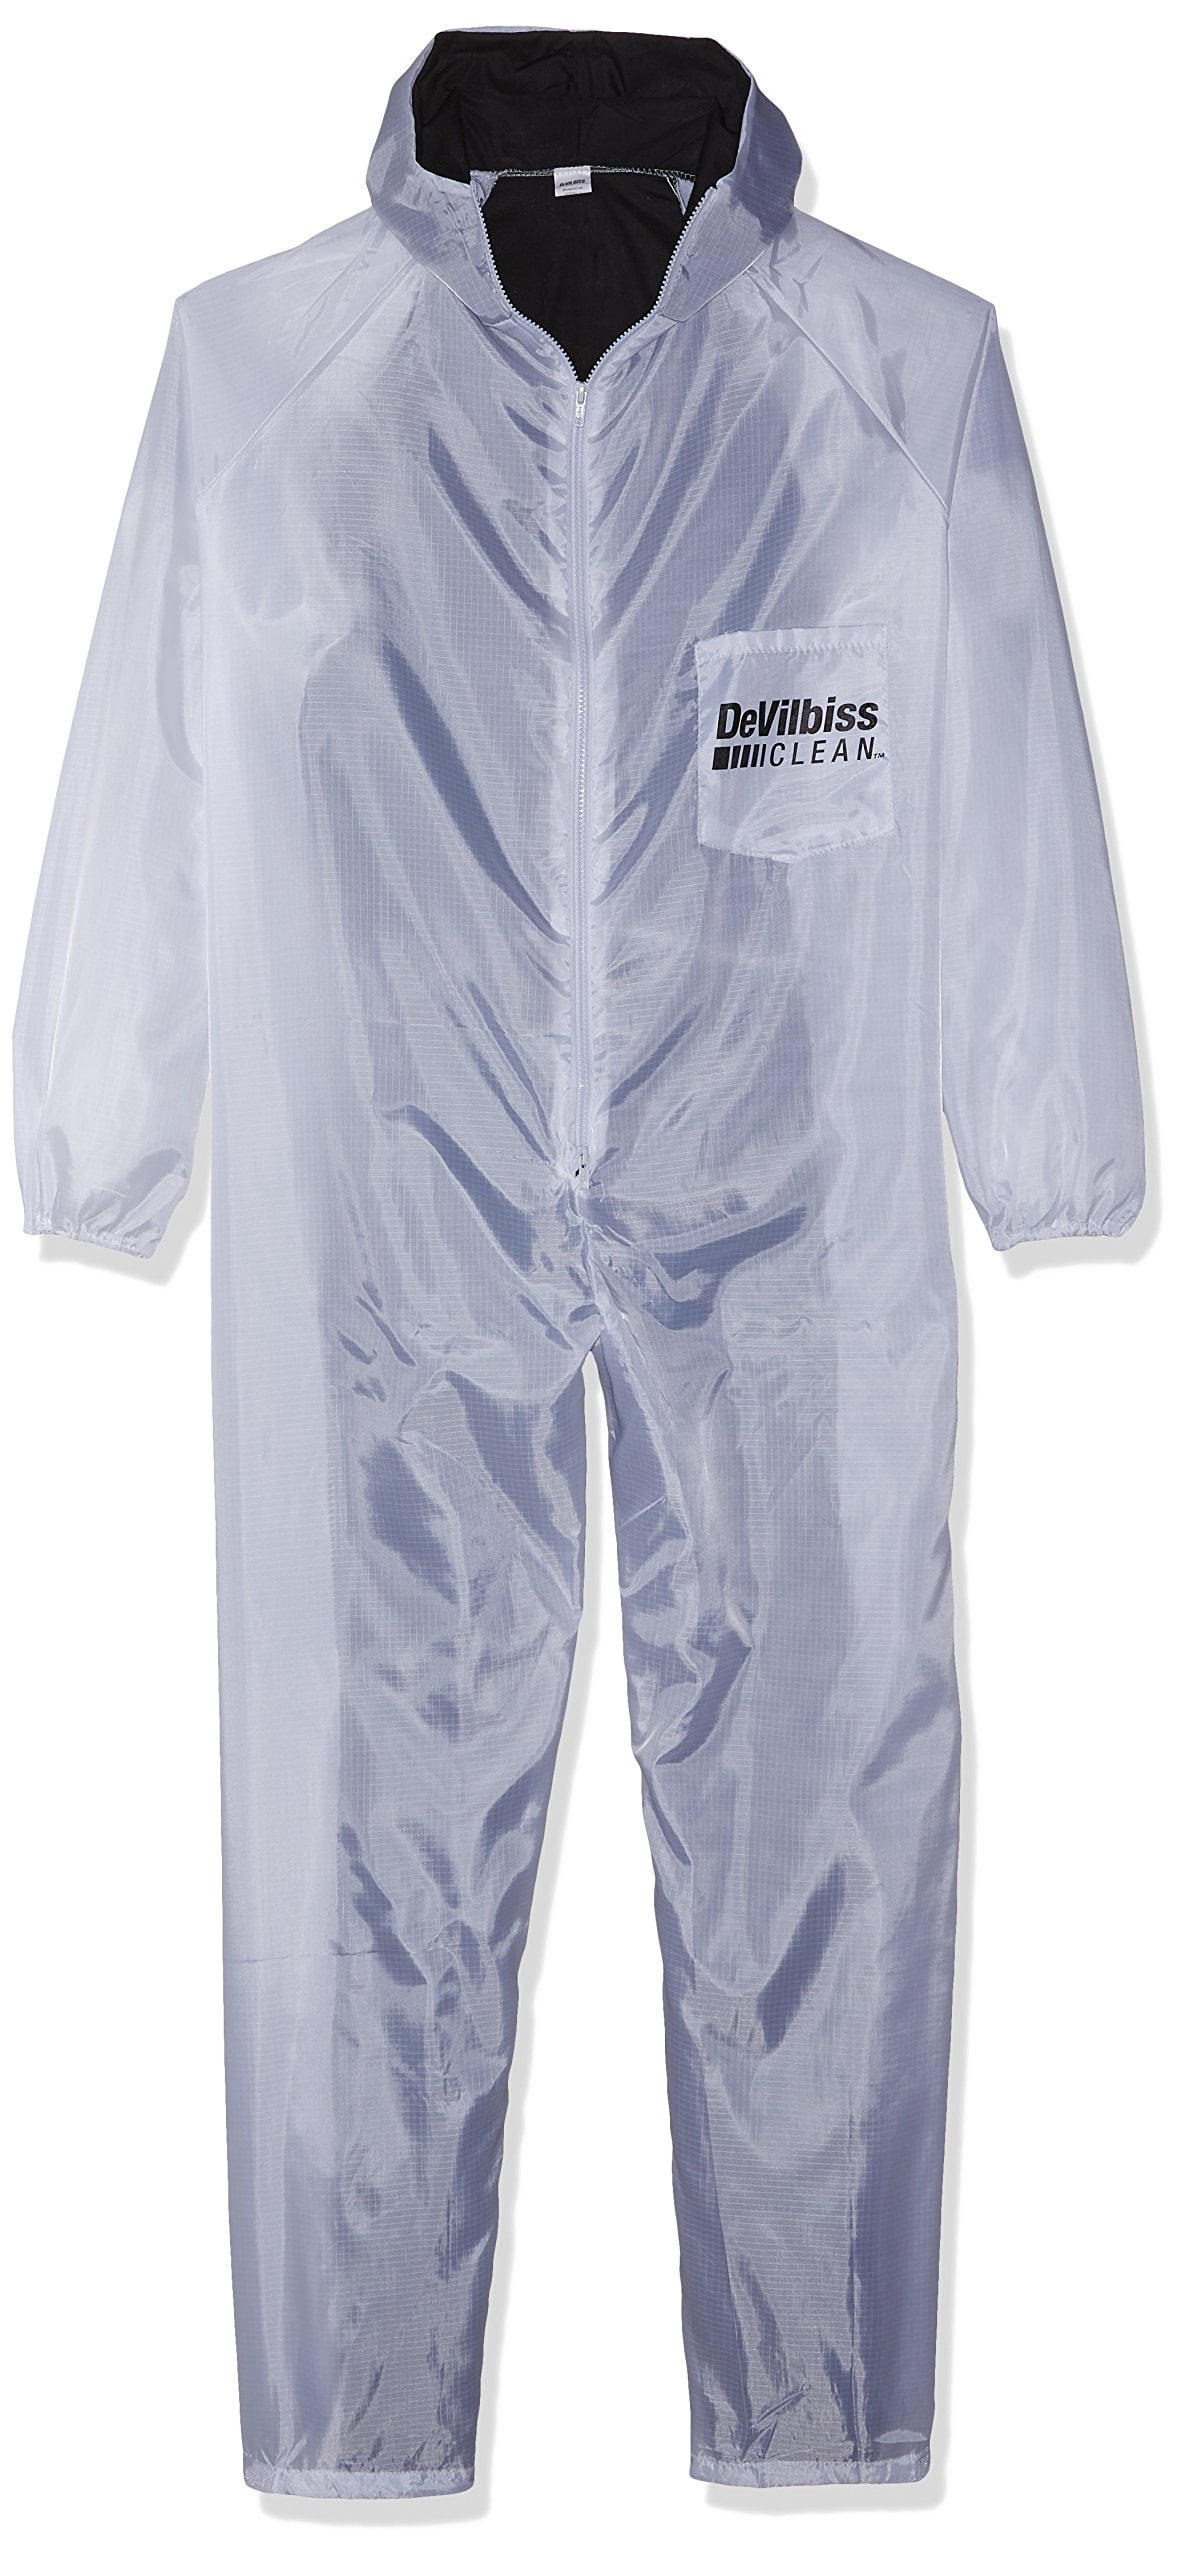 803598 DeVilbiss Reusable Coverall X-Large 